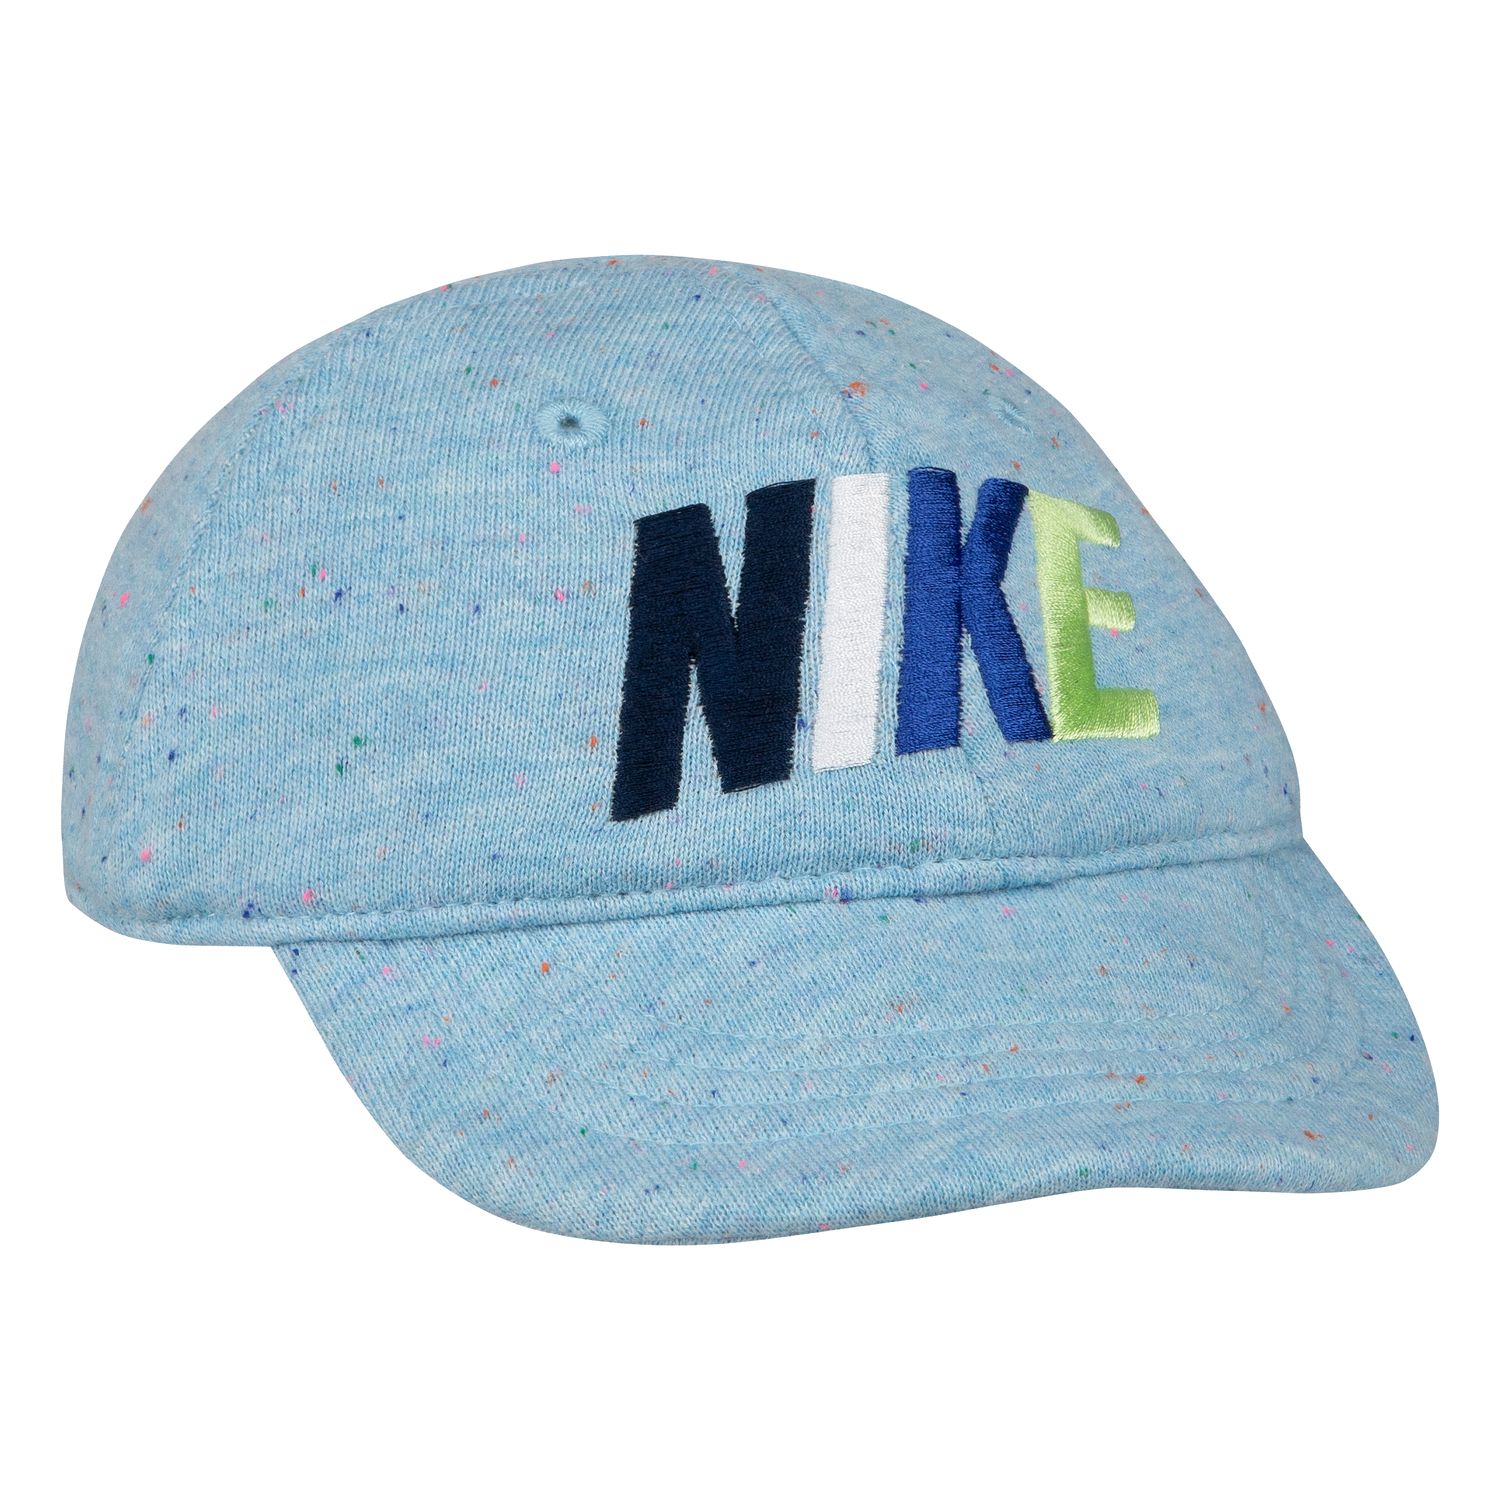 nike cap for baby